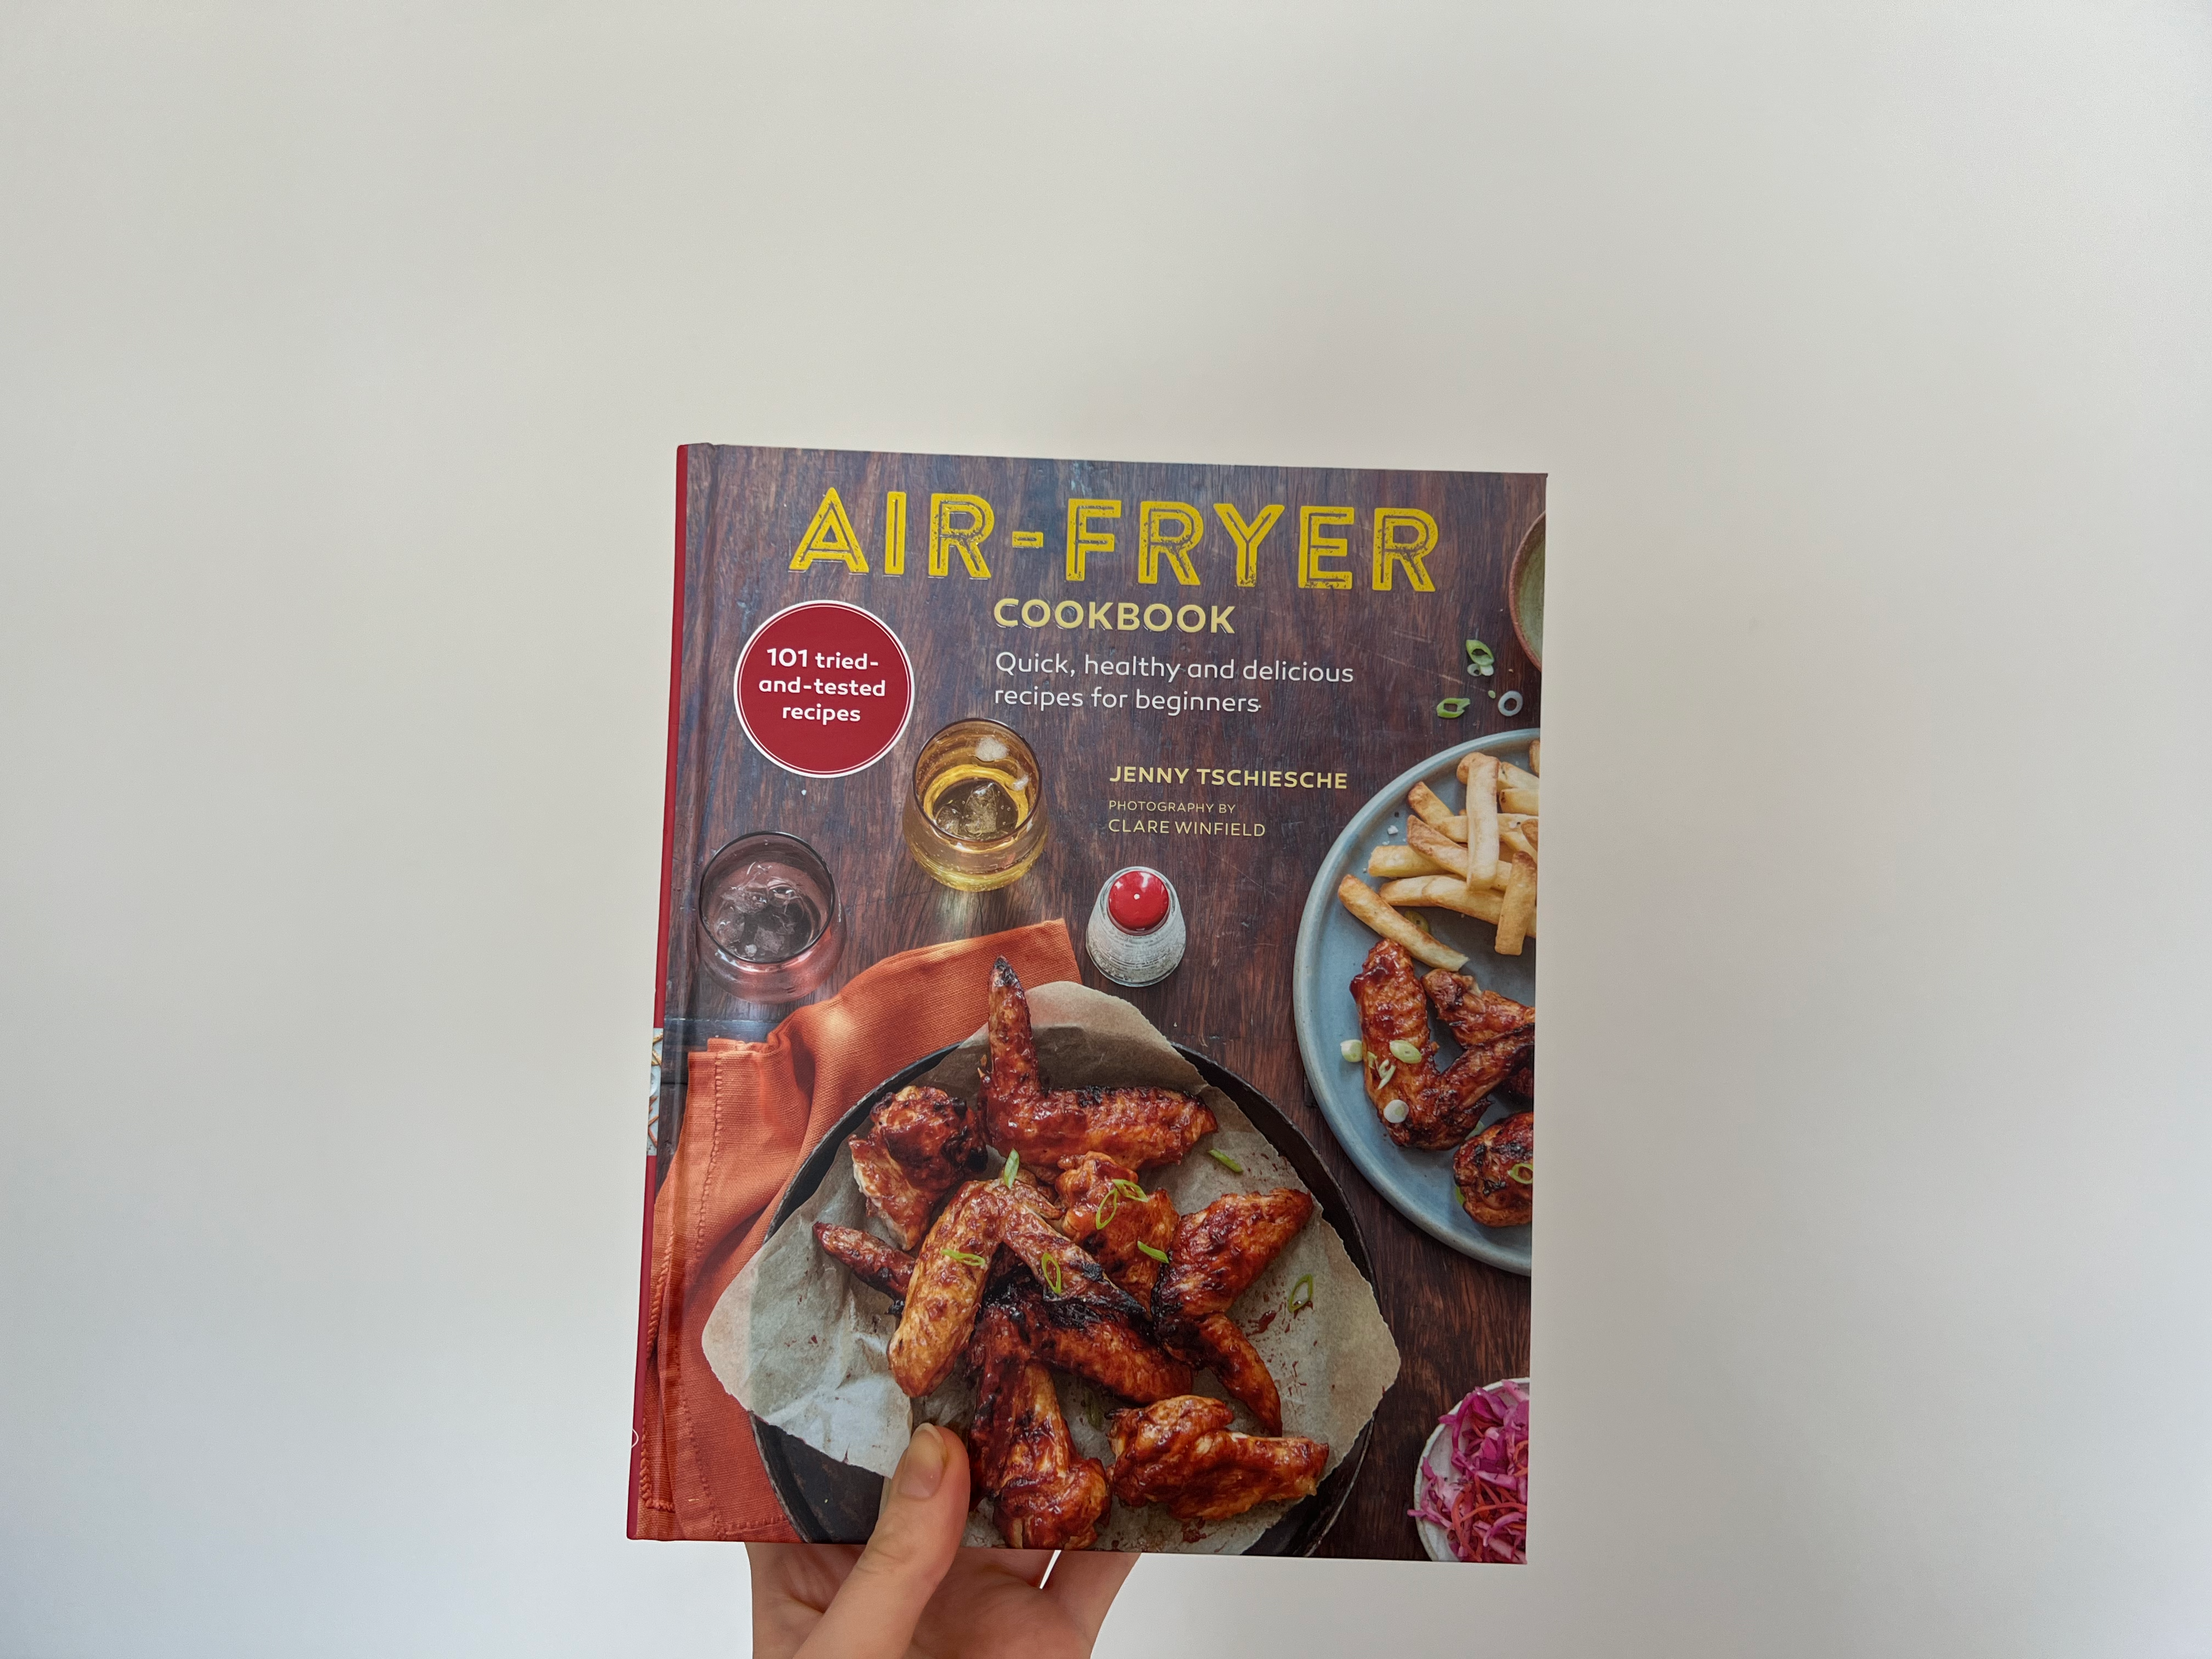 https://static.independent.co.uk/2023/06/27/14/Air-Fryer%20cookbook%20Quick%2C%20healthy%20and%20delicious%20recipes%20for%20beginners.png